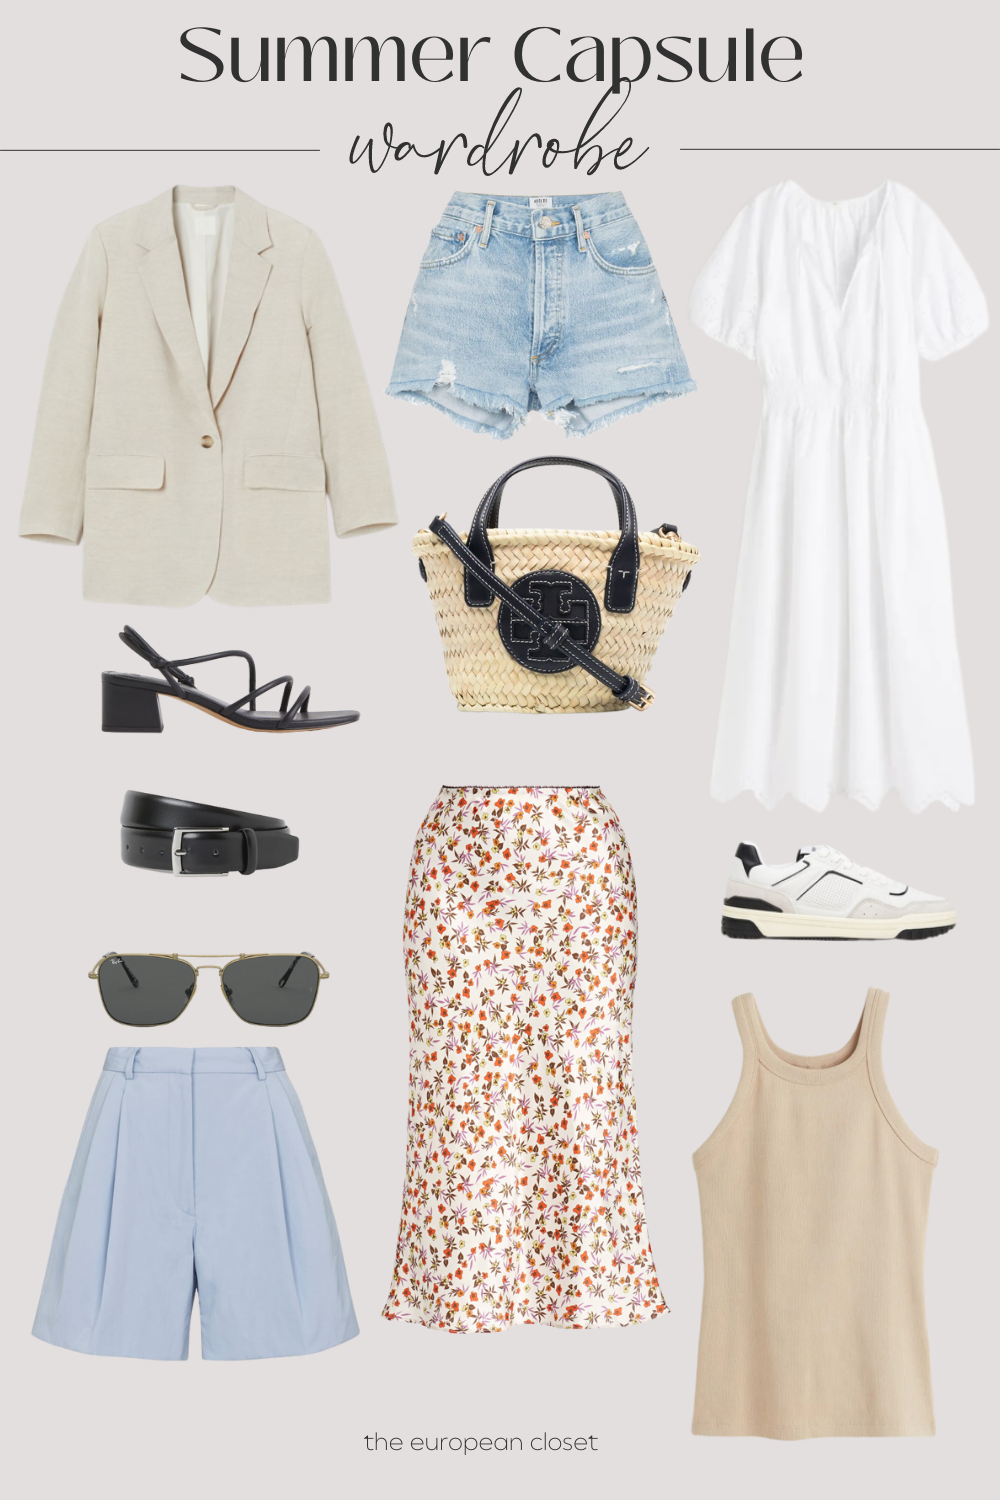 If you're looking to cretae your very own summer capsule wardrobe but don't know where to start, this post is perfect for you.